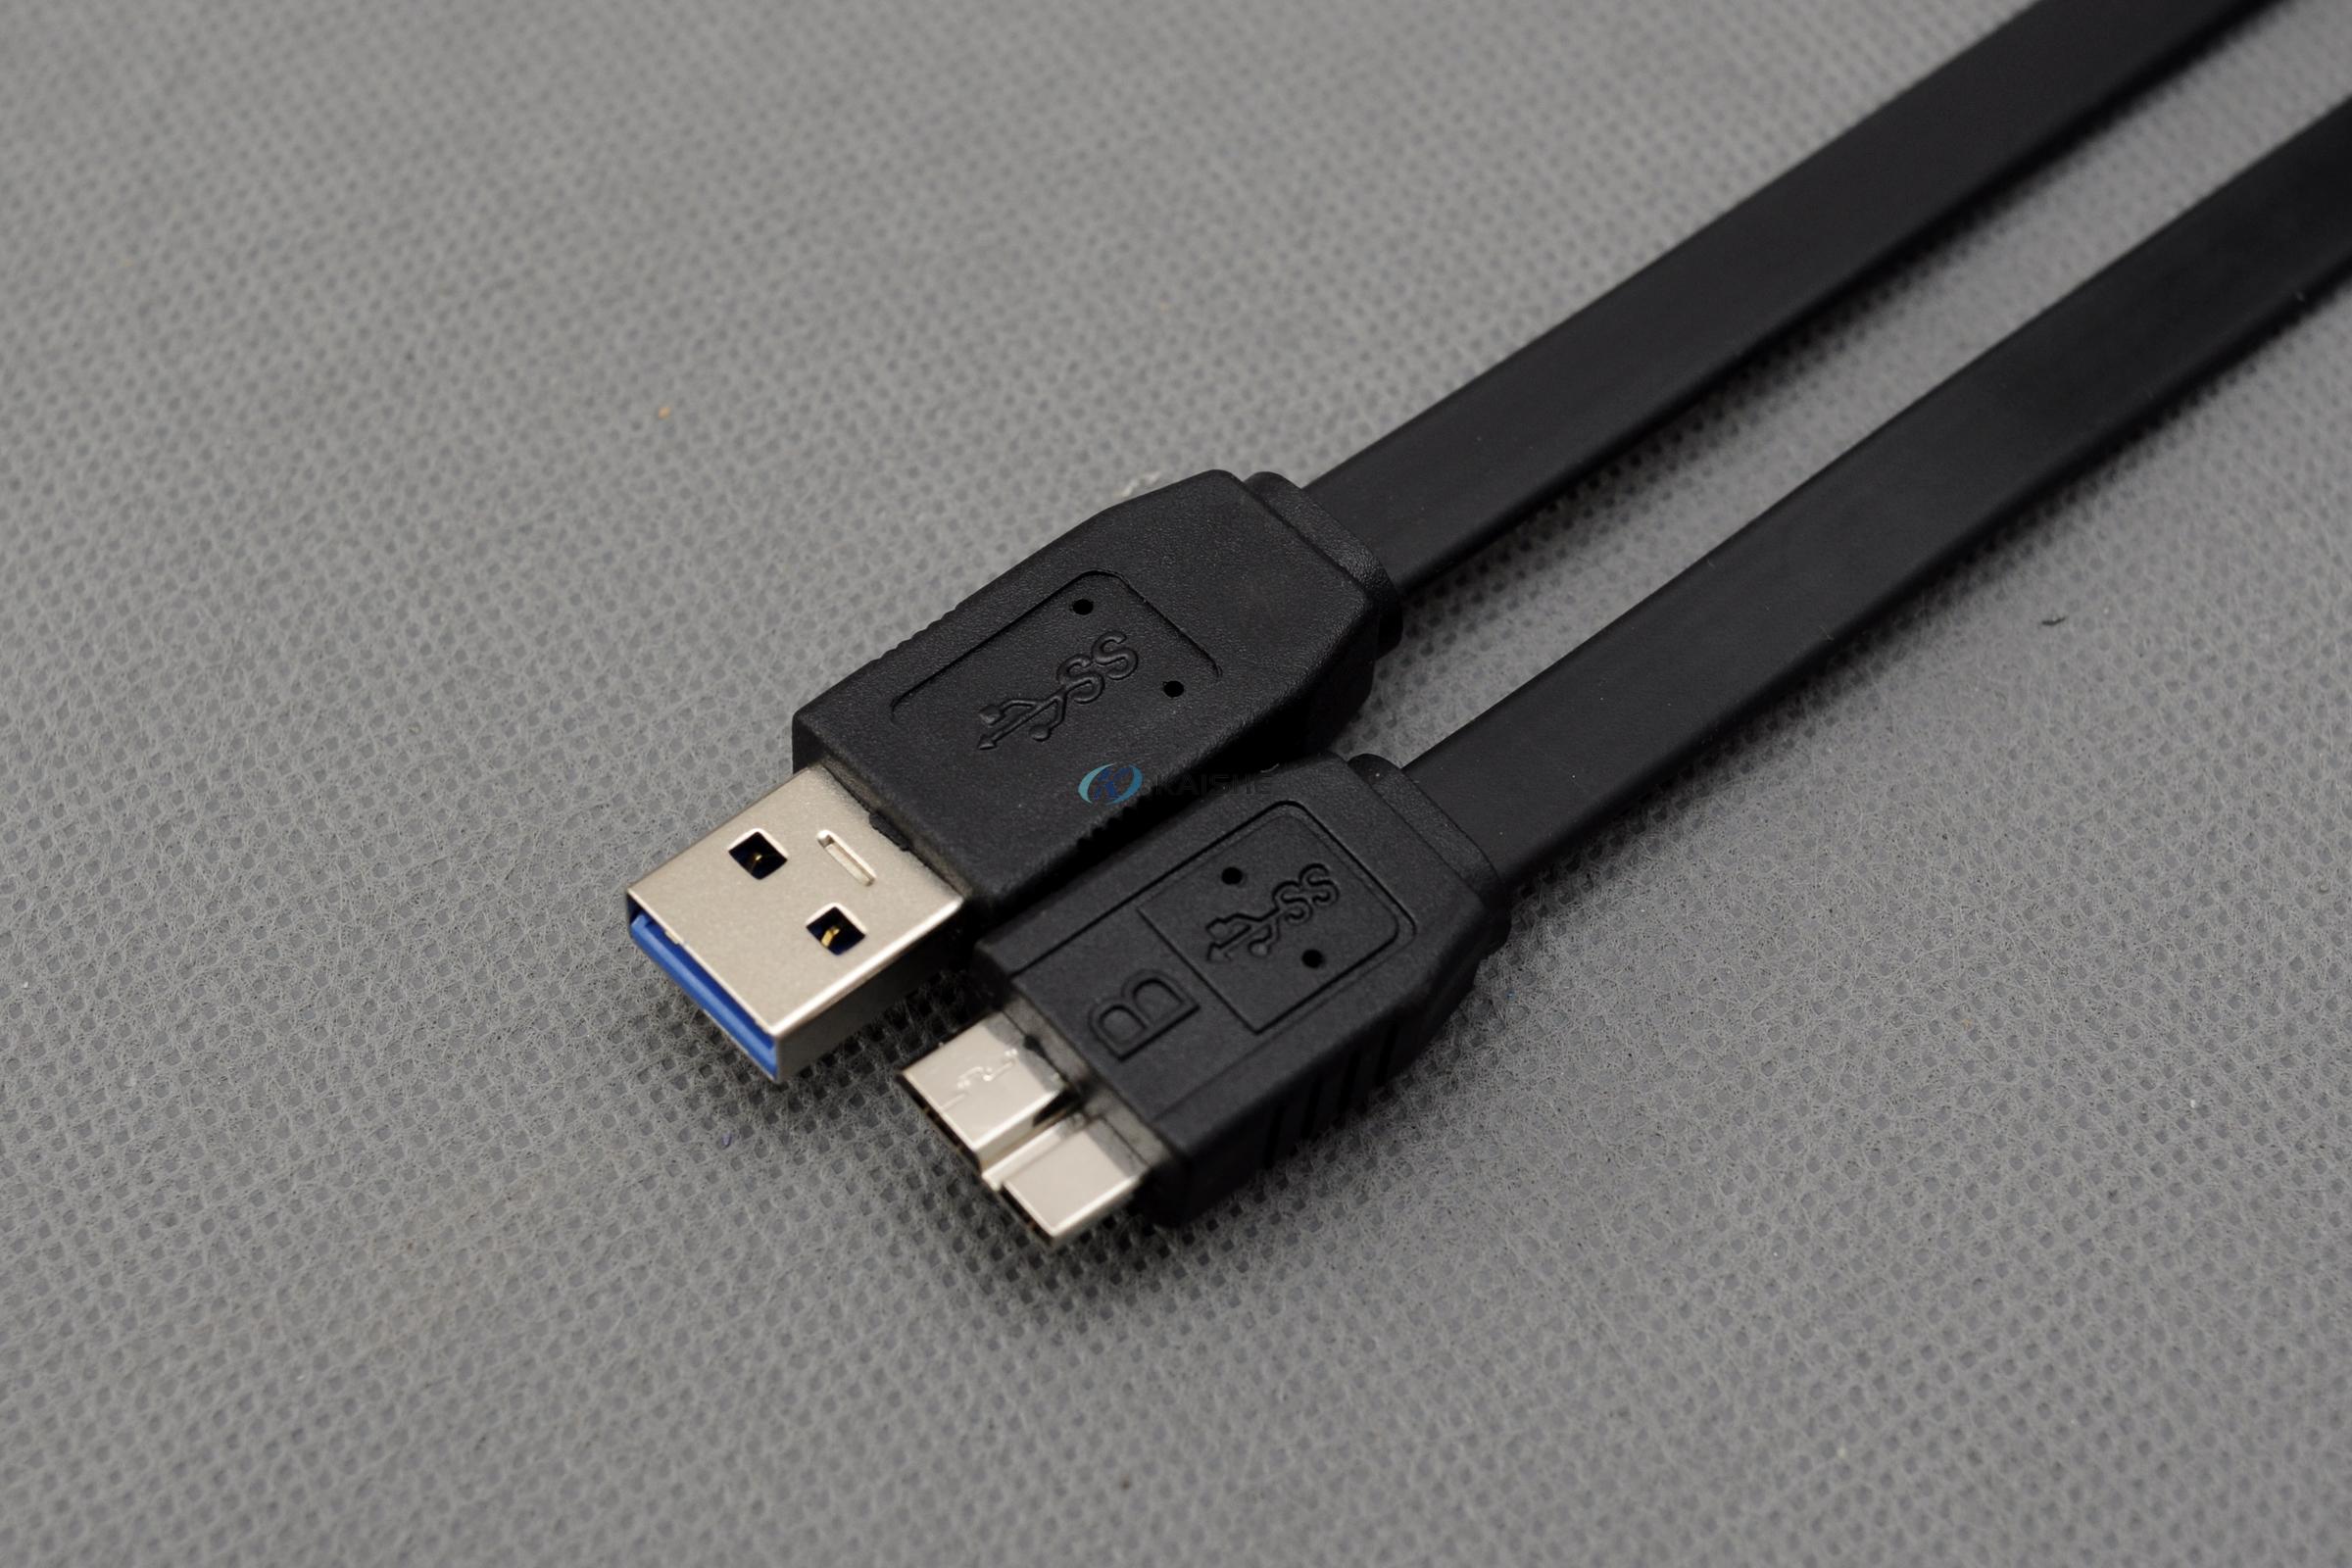 SuperSpeed USB 3.0 Type A to Micro-B Cable